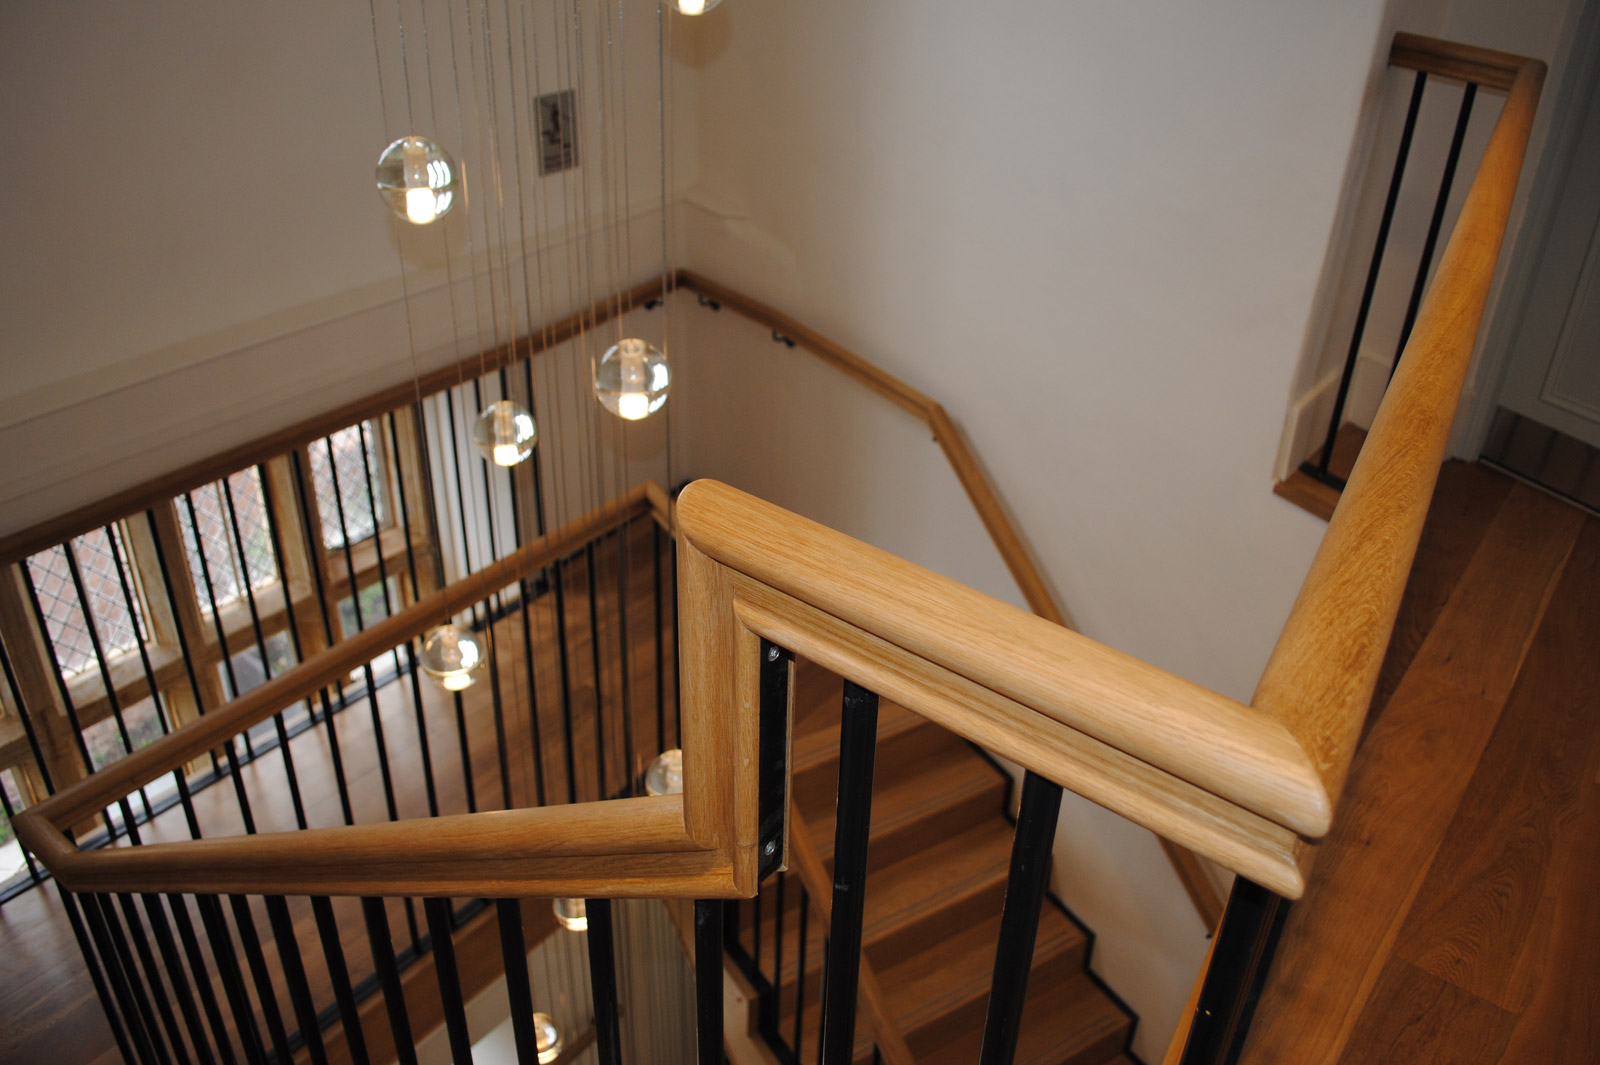 Bespoke timber staircases